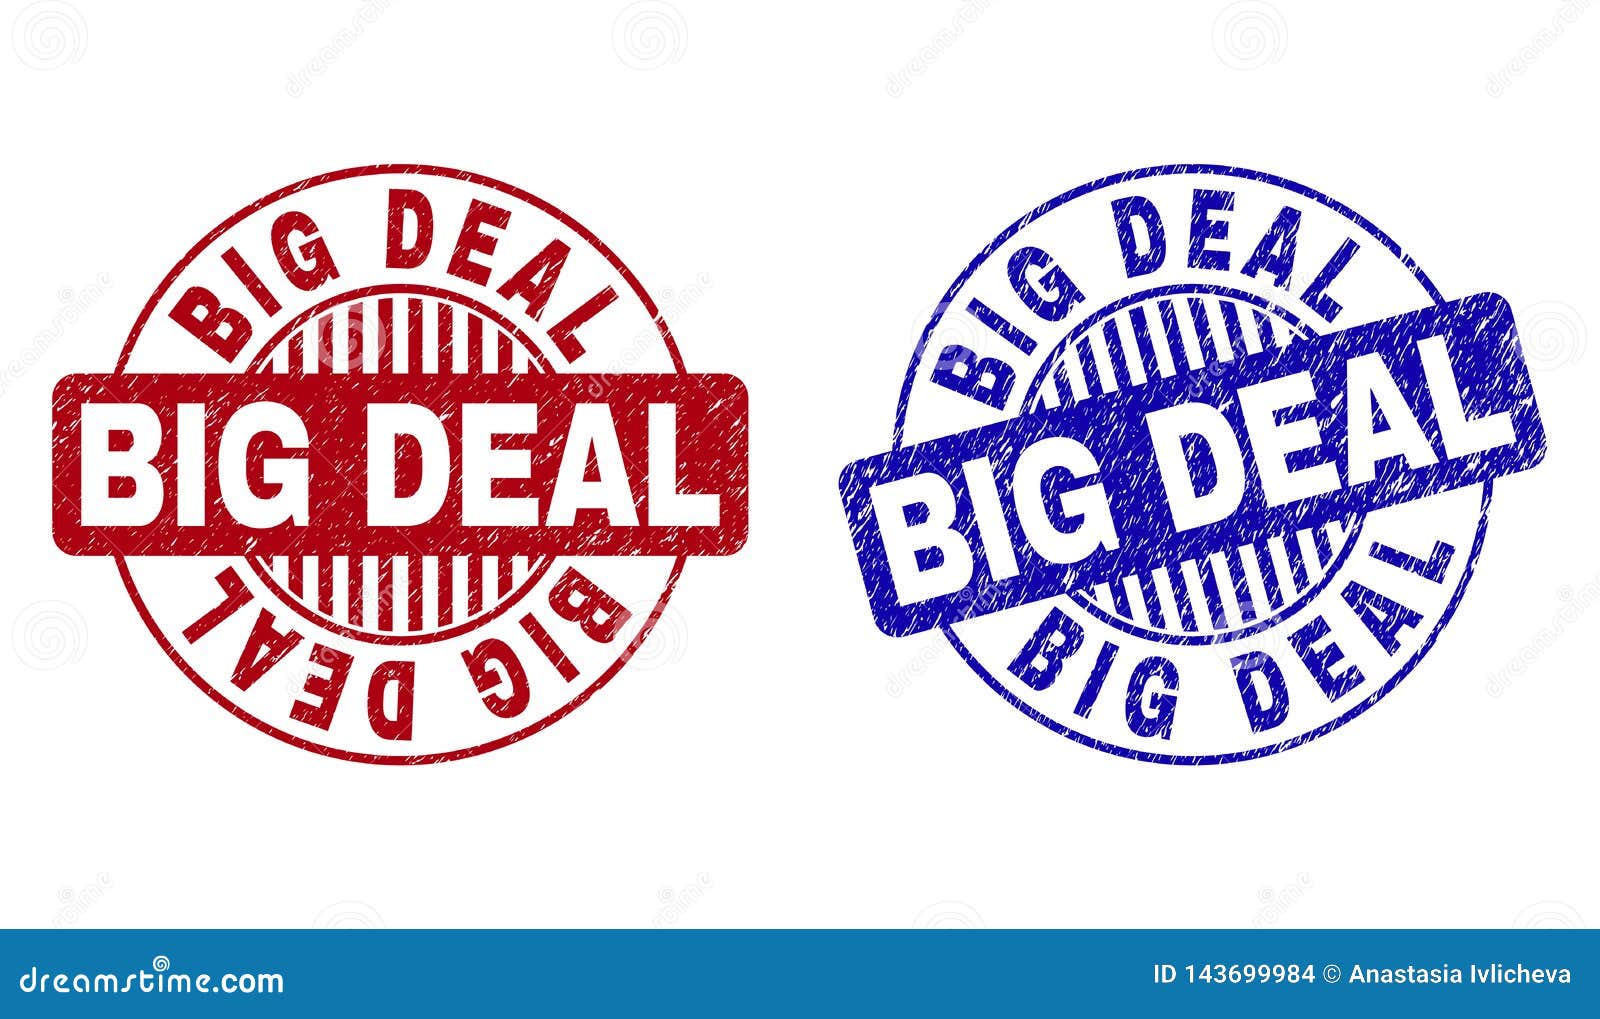 Grunge BIG DEAL Textured Round Watermarks. Grunge BIG DEAL round stamp seals isolated on a white background. Round seals with grunge texture in red and blue colors. Vector rubber overlay of BIG DEAL caption inside circle form with stripes.